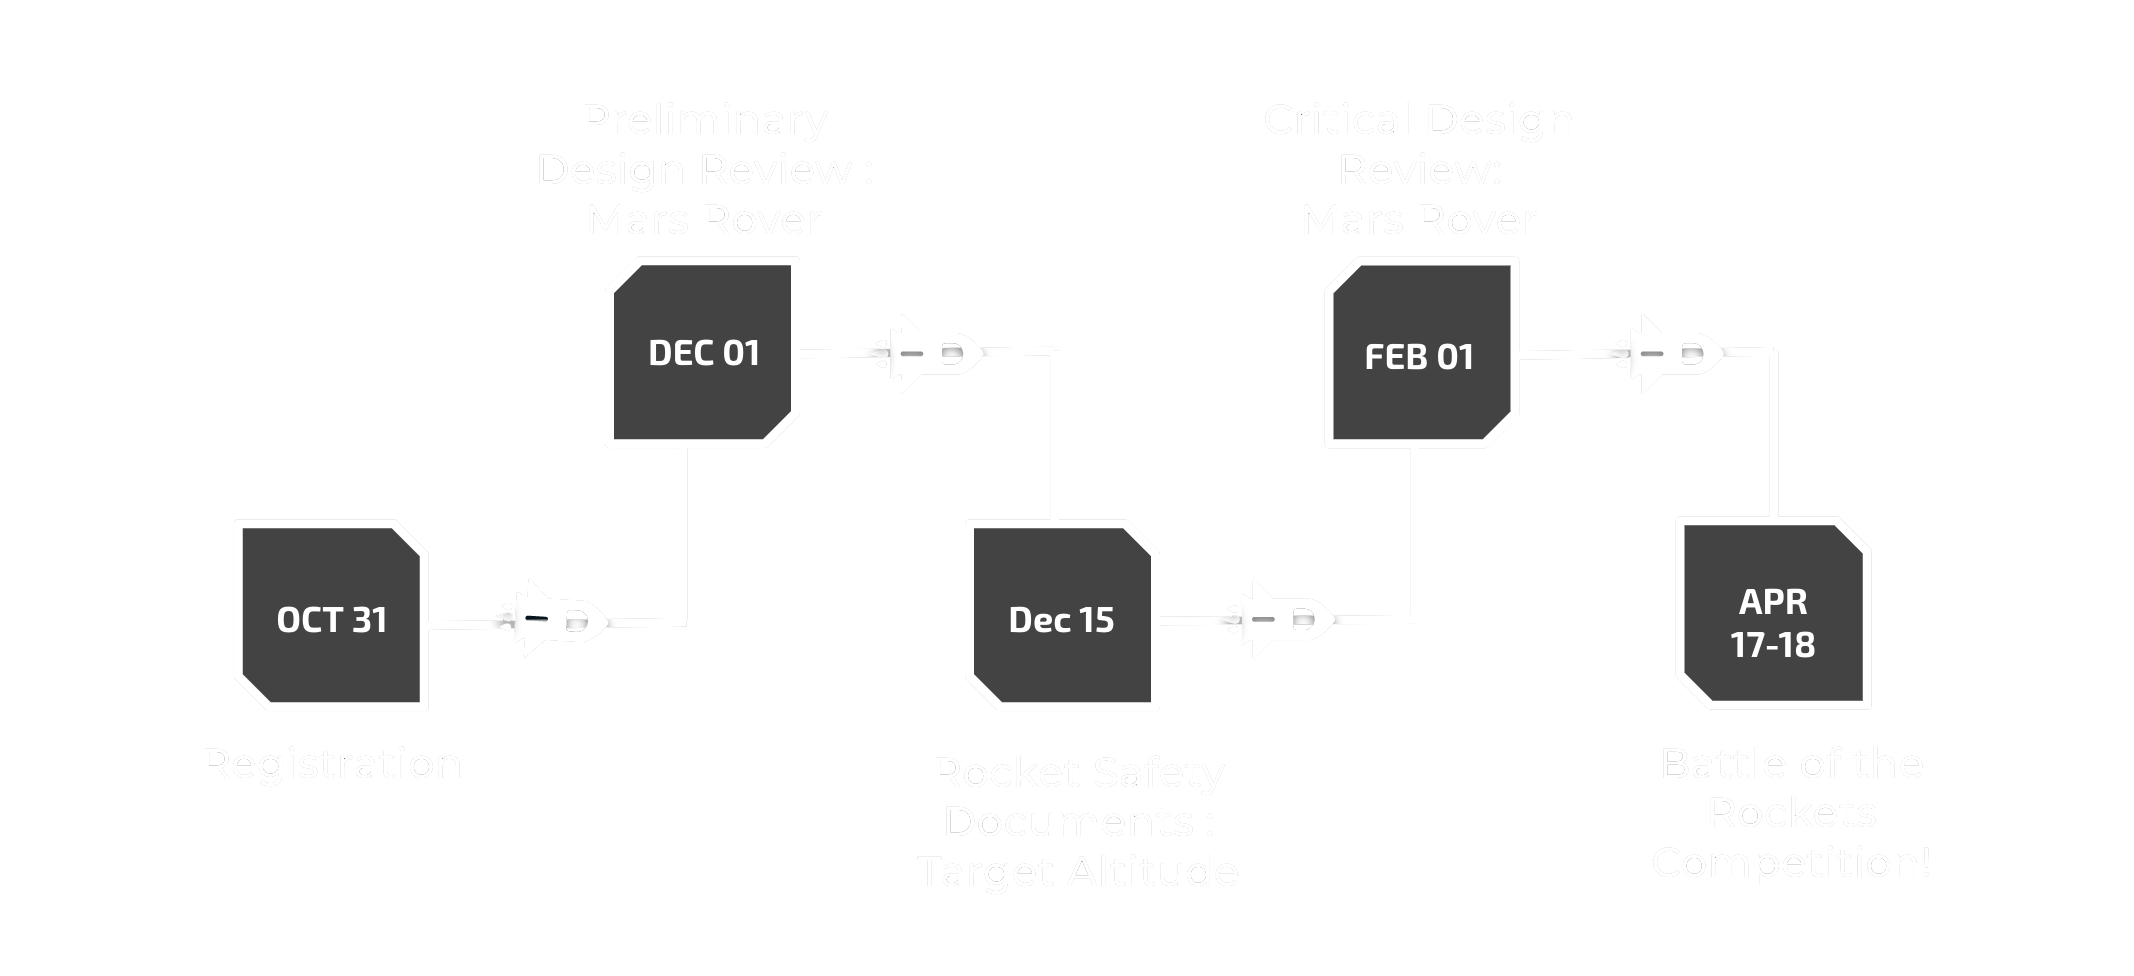 Oct 31: Registration, Dec 1: Prelimary Design Review: Mars Rover, Dec 15 Rocket Safety Documents: Target Altitude,
Feb 1: Critical Design Review: Mars Rover, Apr 17-18: Battle of the Rockets Competition!